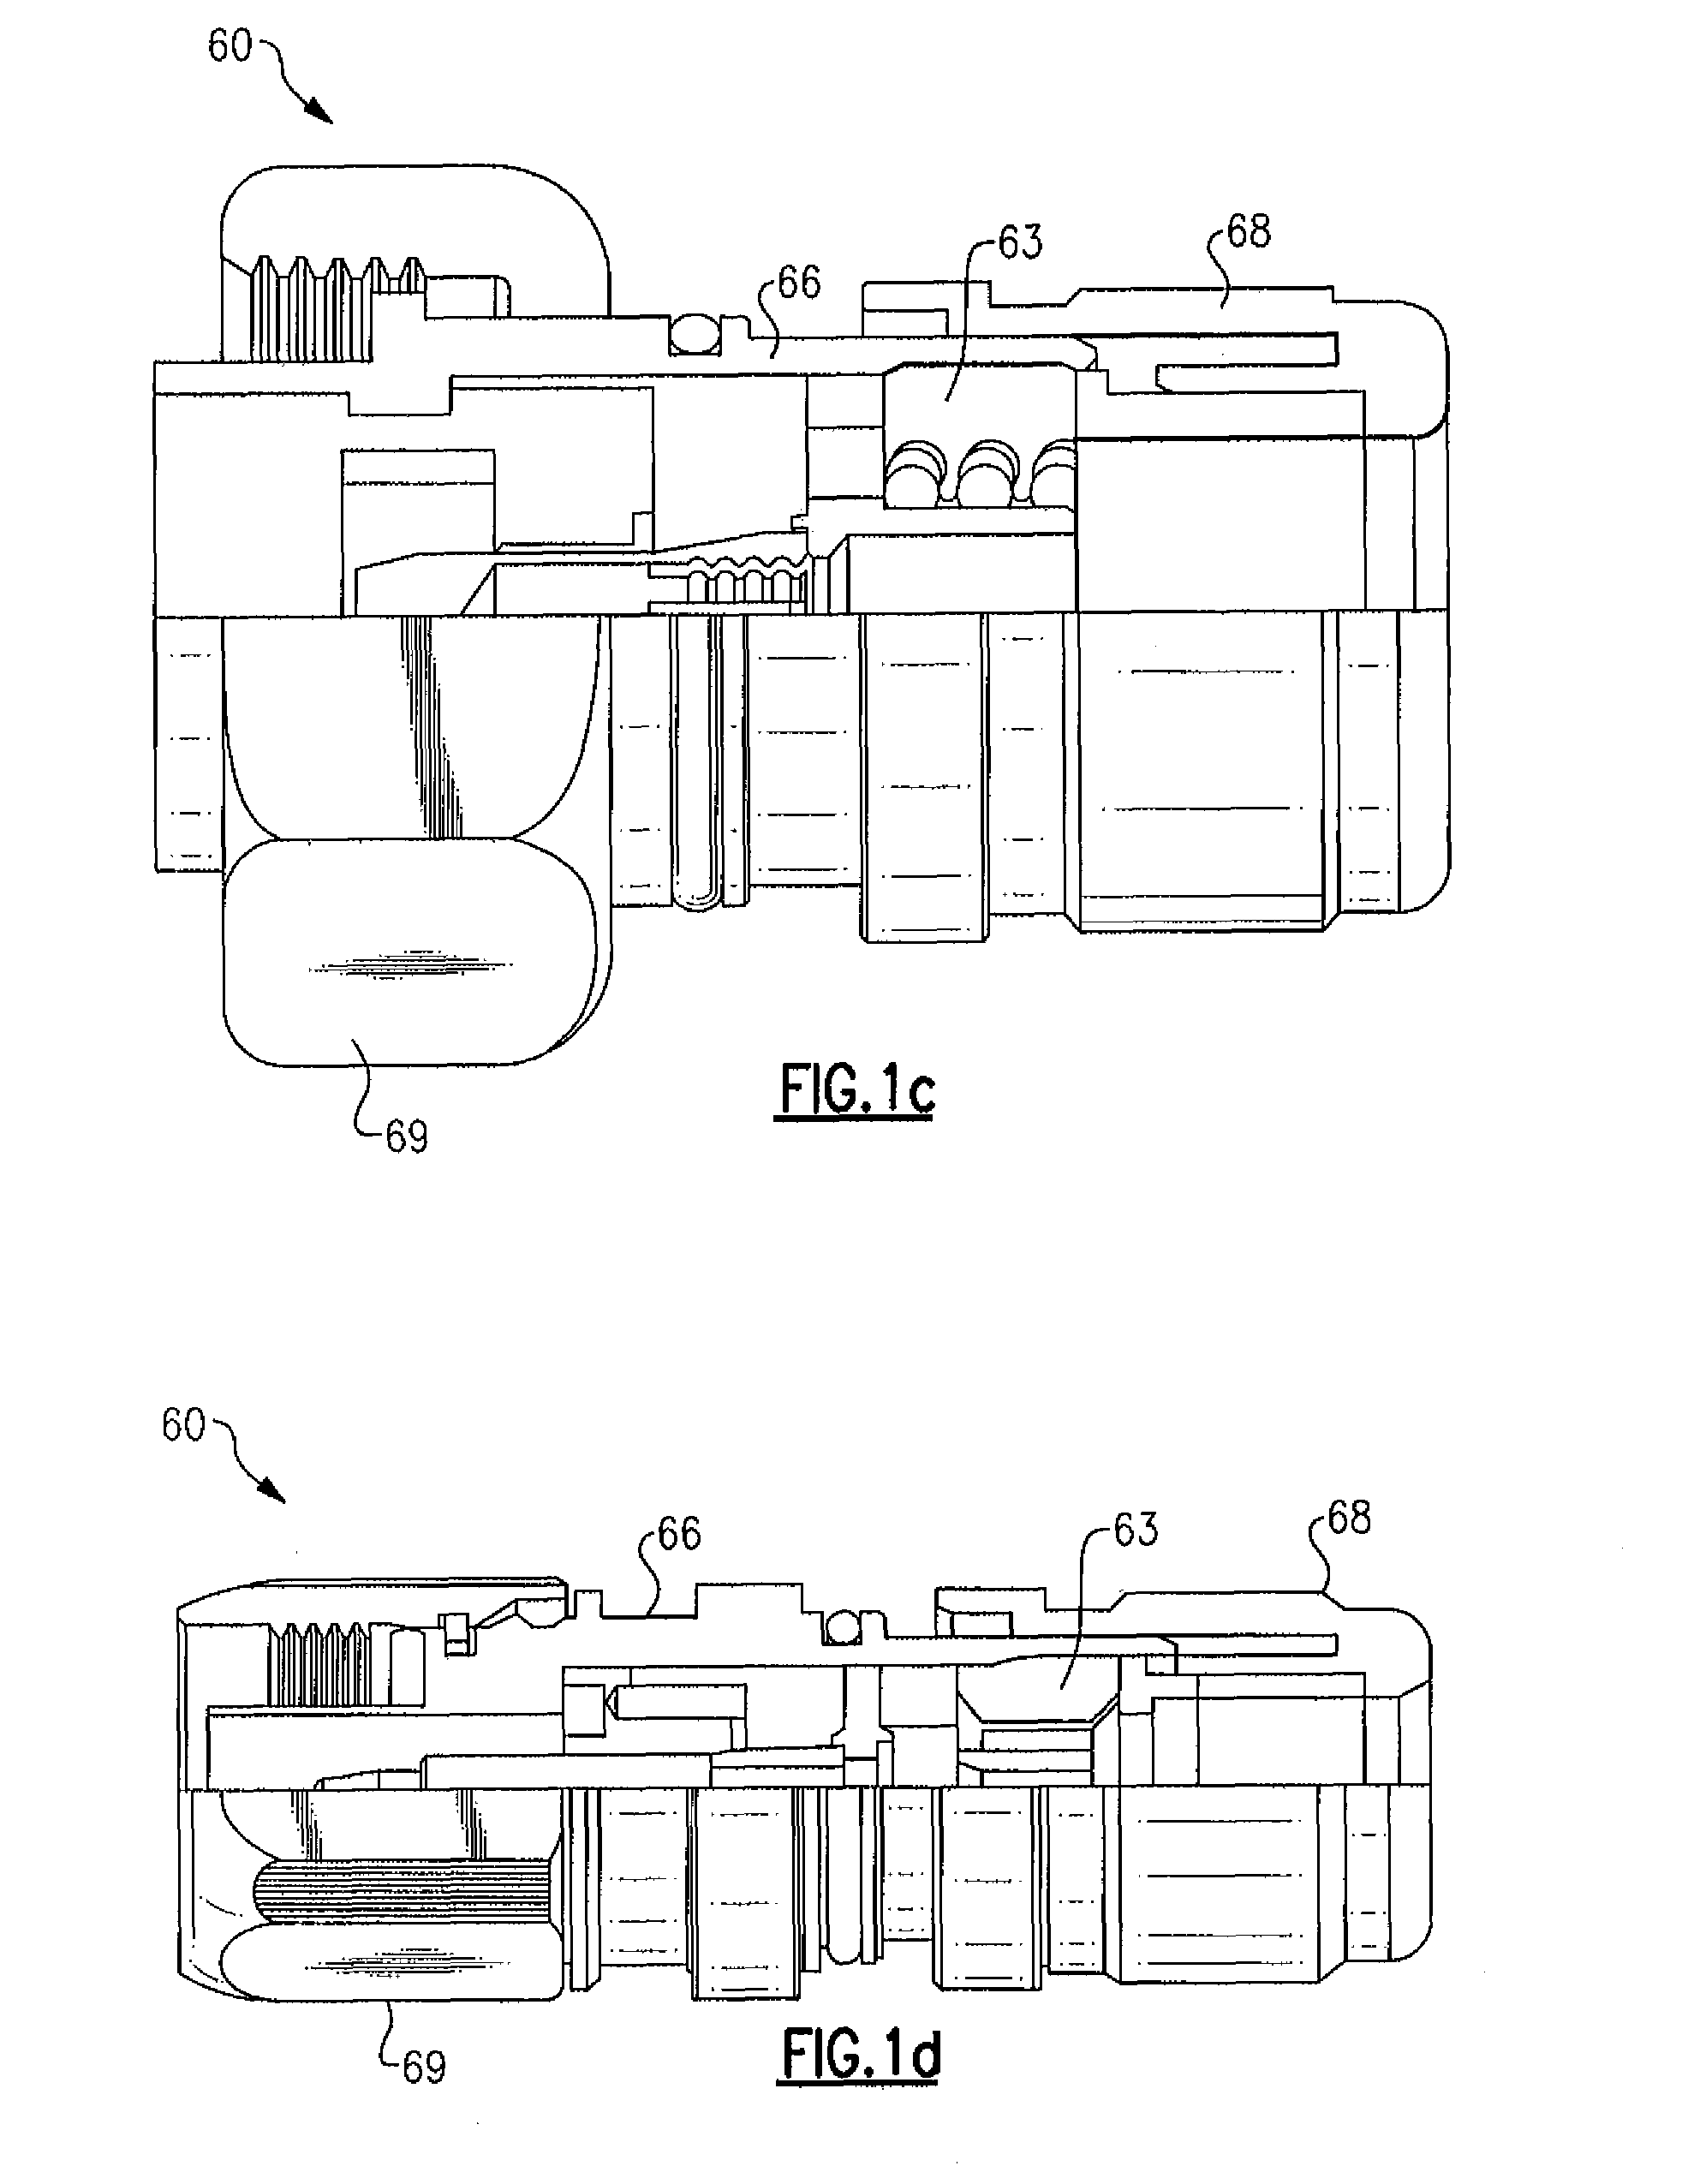 Hydraulic compression tool for installing a coaxial cable connector